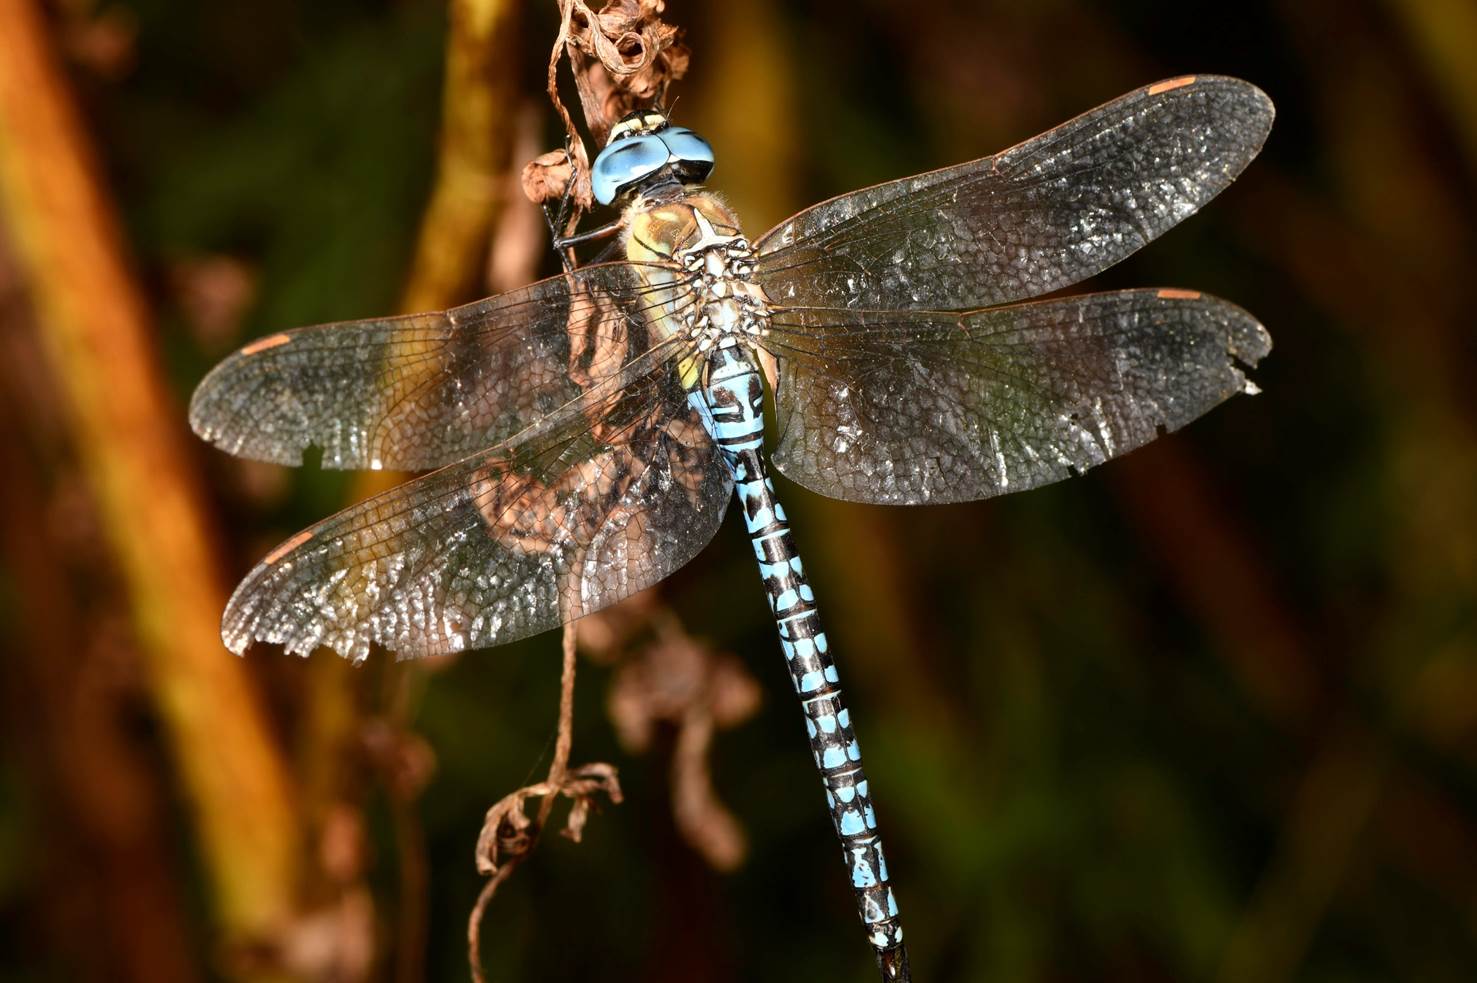 A dragonfly with wings

Description automatically generated